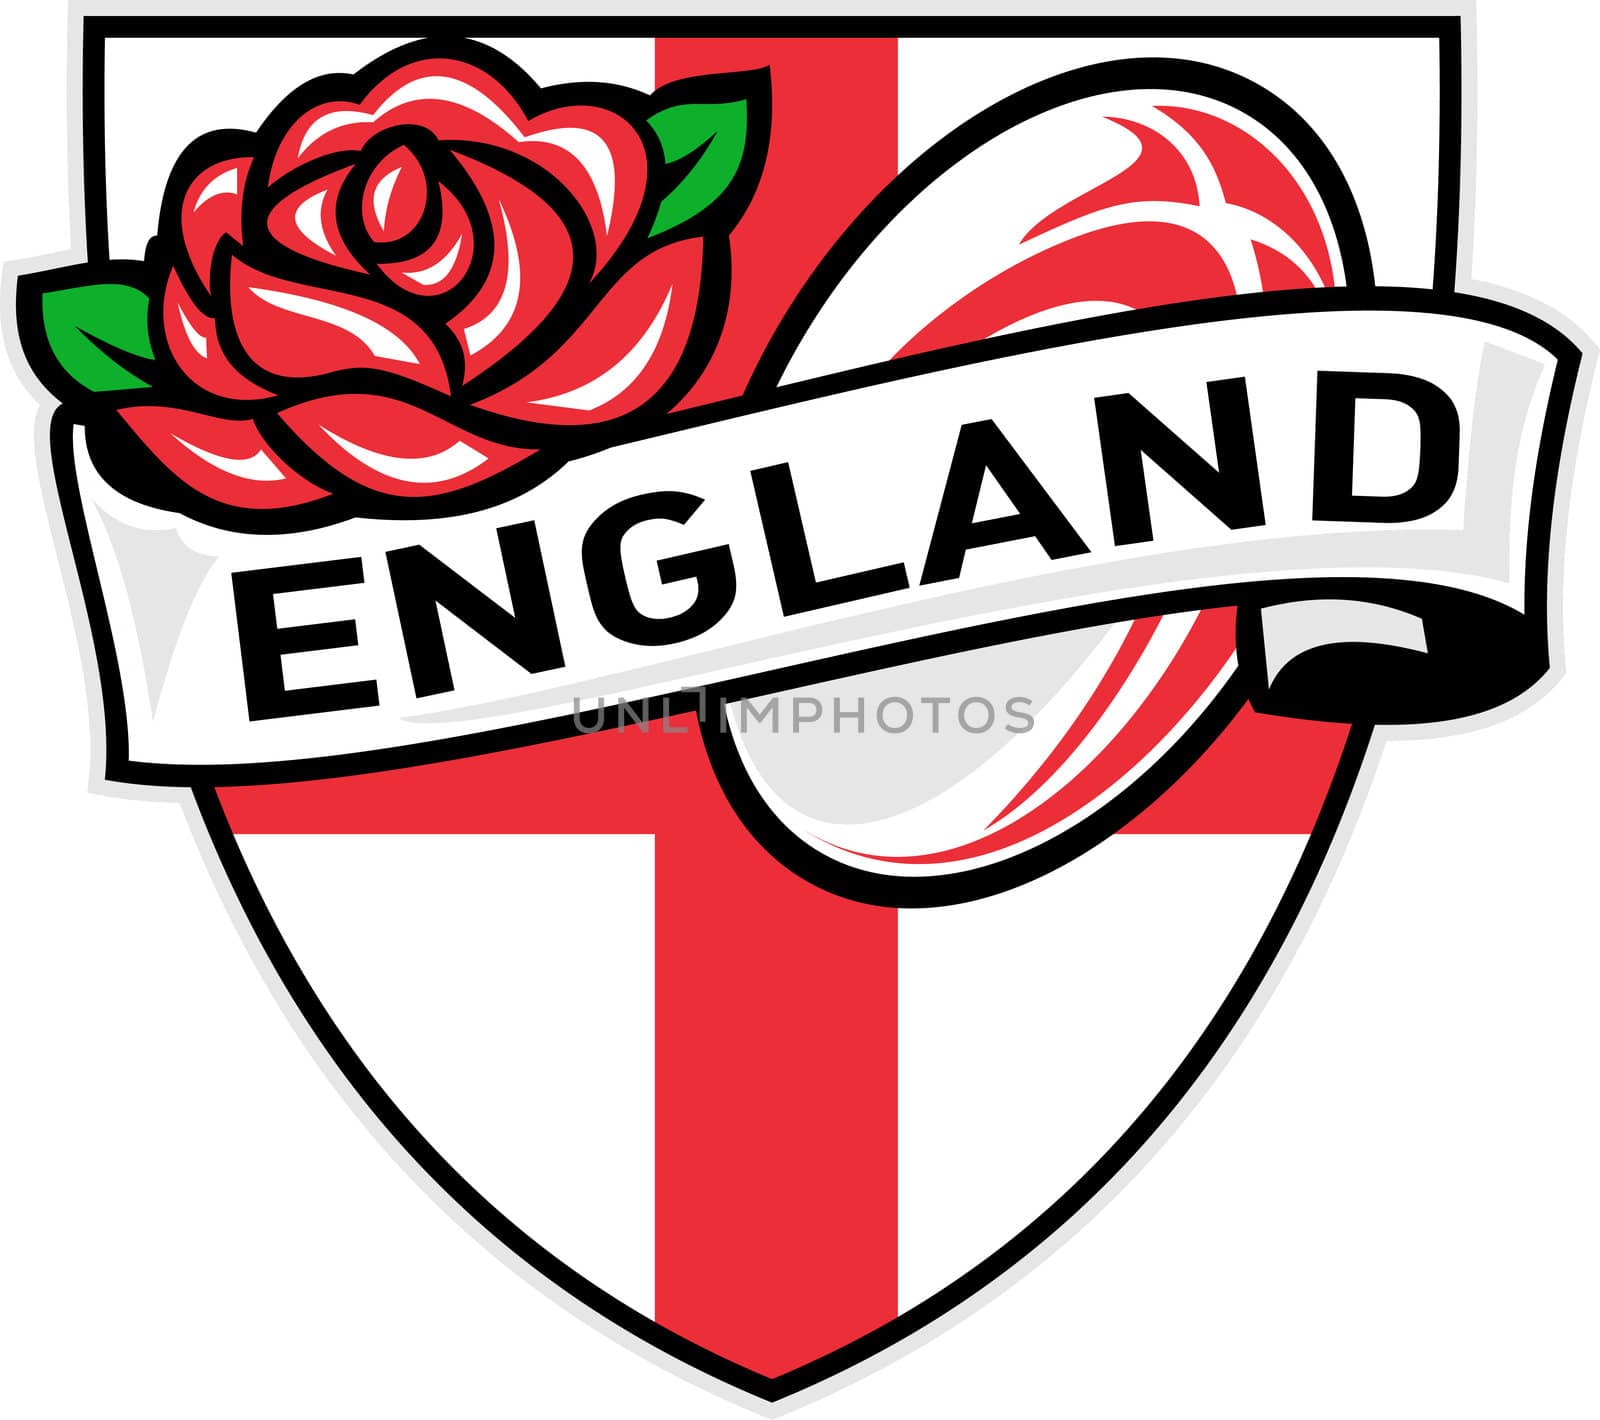 Illustration of a red English rose inside flag shield with rugby ball flying out and words "England"